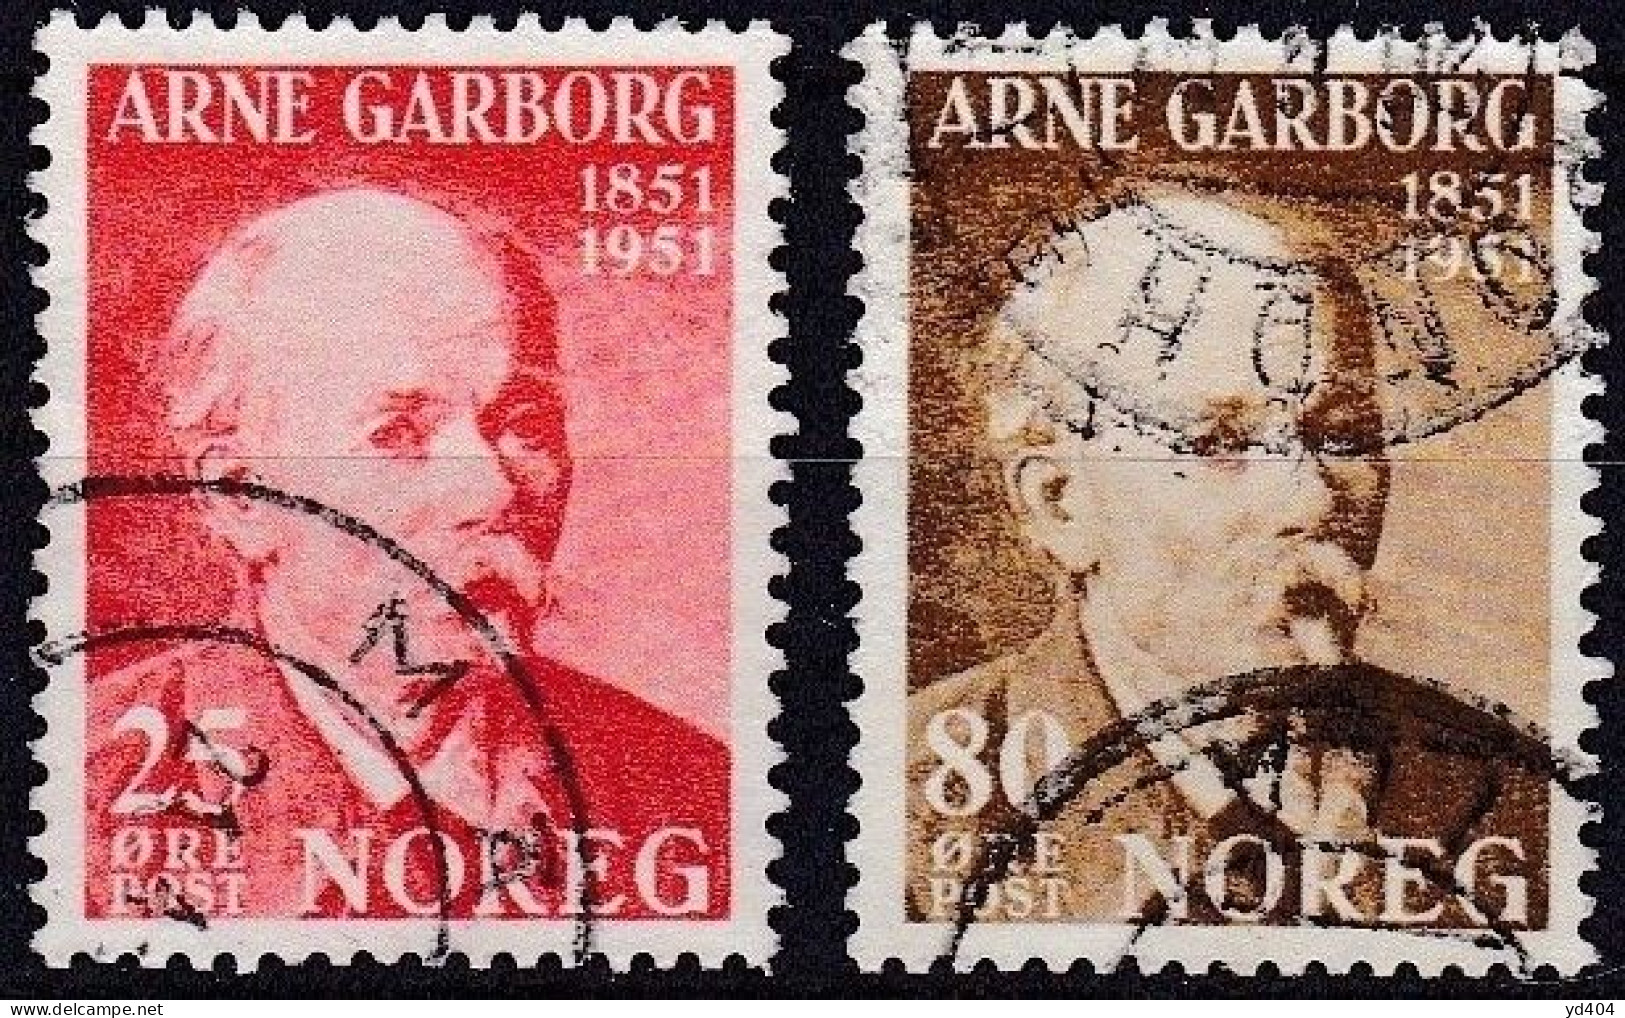 NO064B – NORVEGE - NORWAY – 1951 – VARIOUS ISSUES – SG # 433-440 USED 4 € - Used Stamps